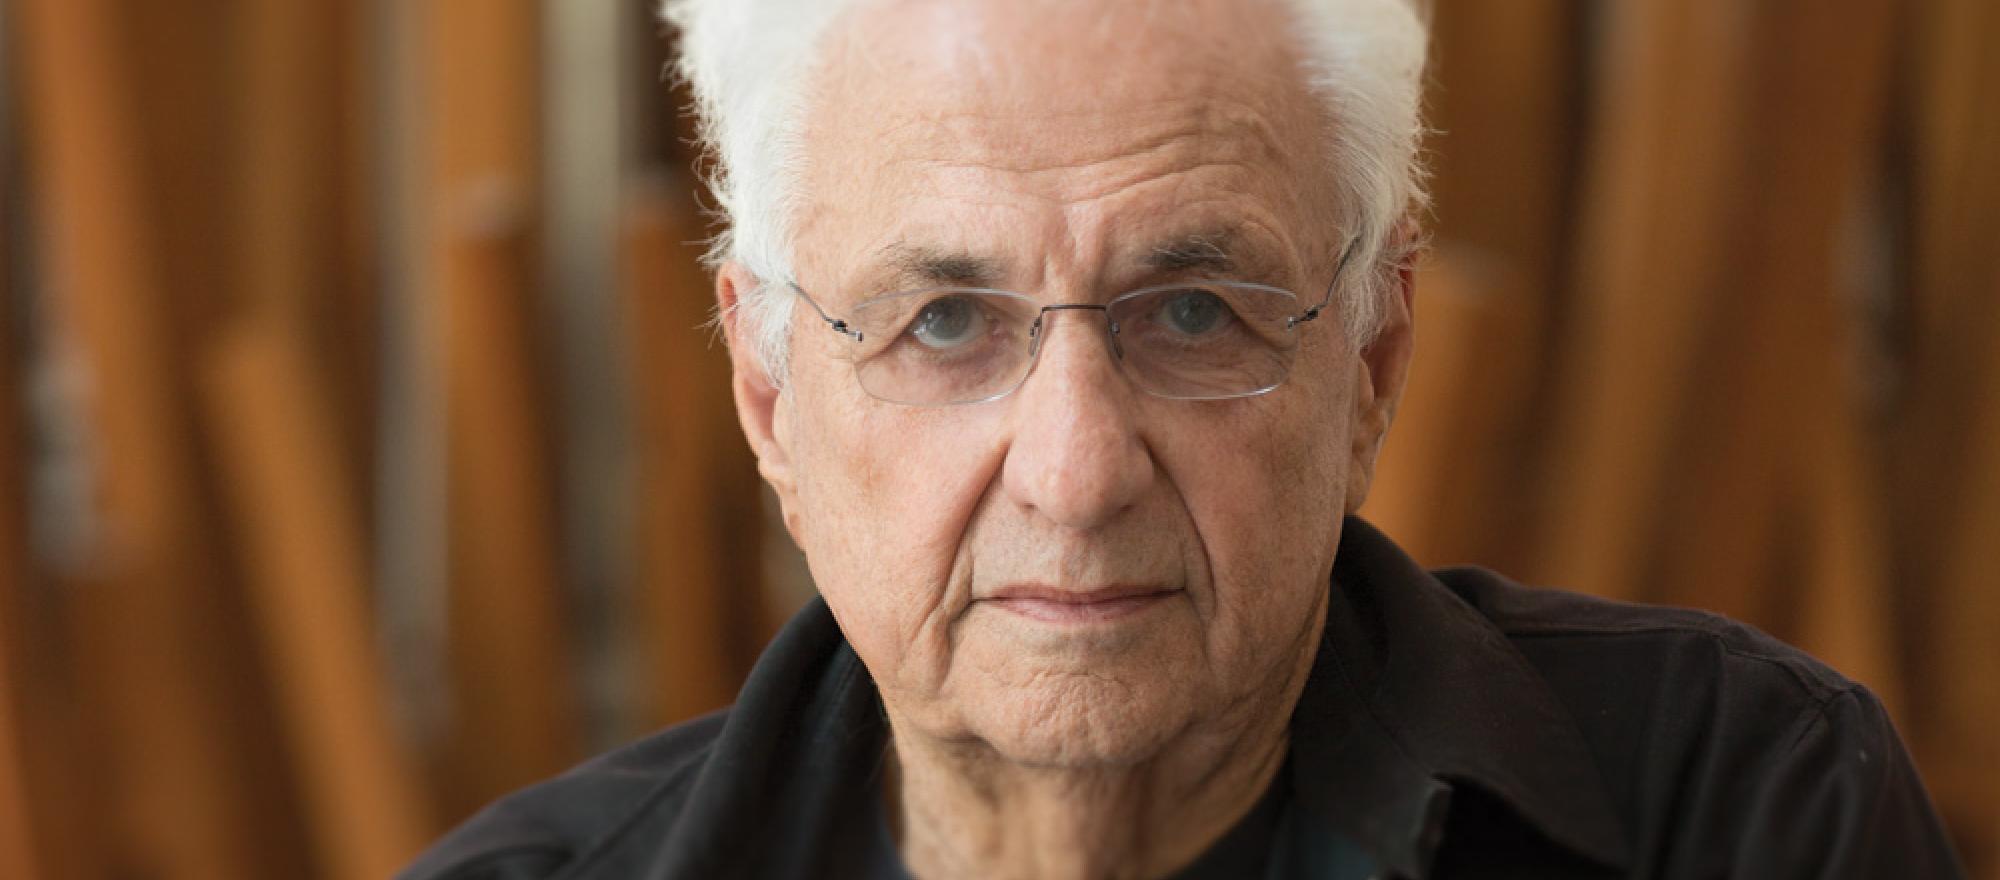 Architect Frank Gehry.  All photos by Chad Slattery except where noted.